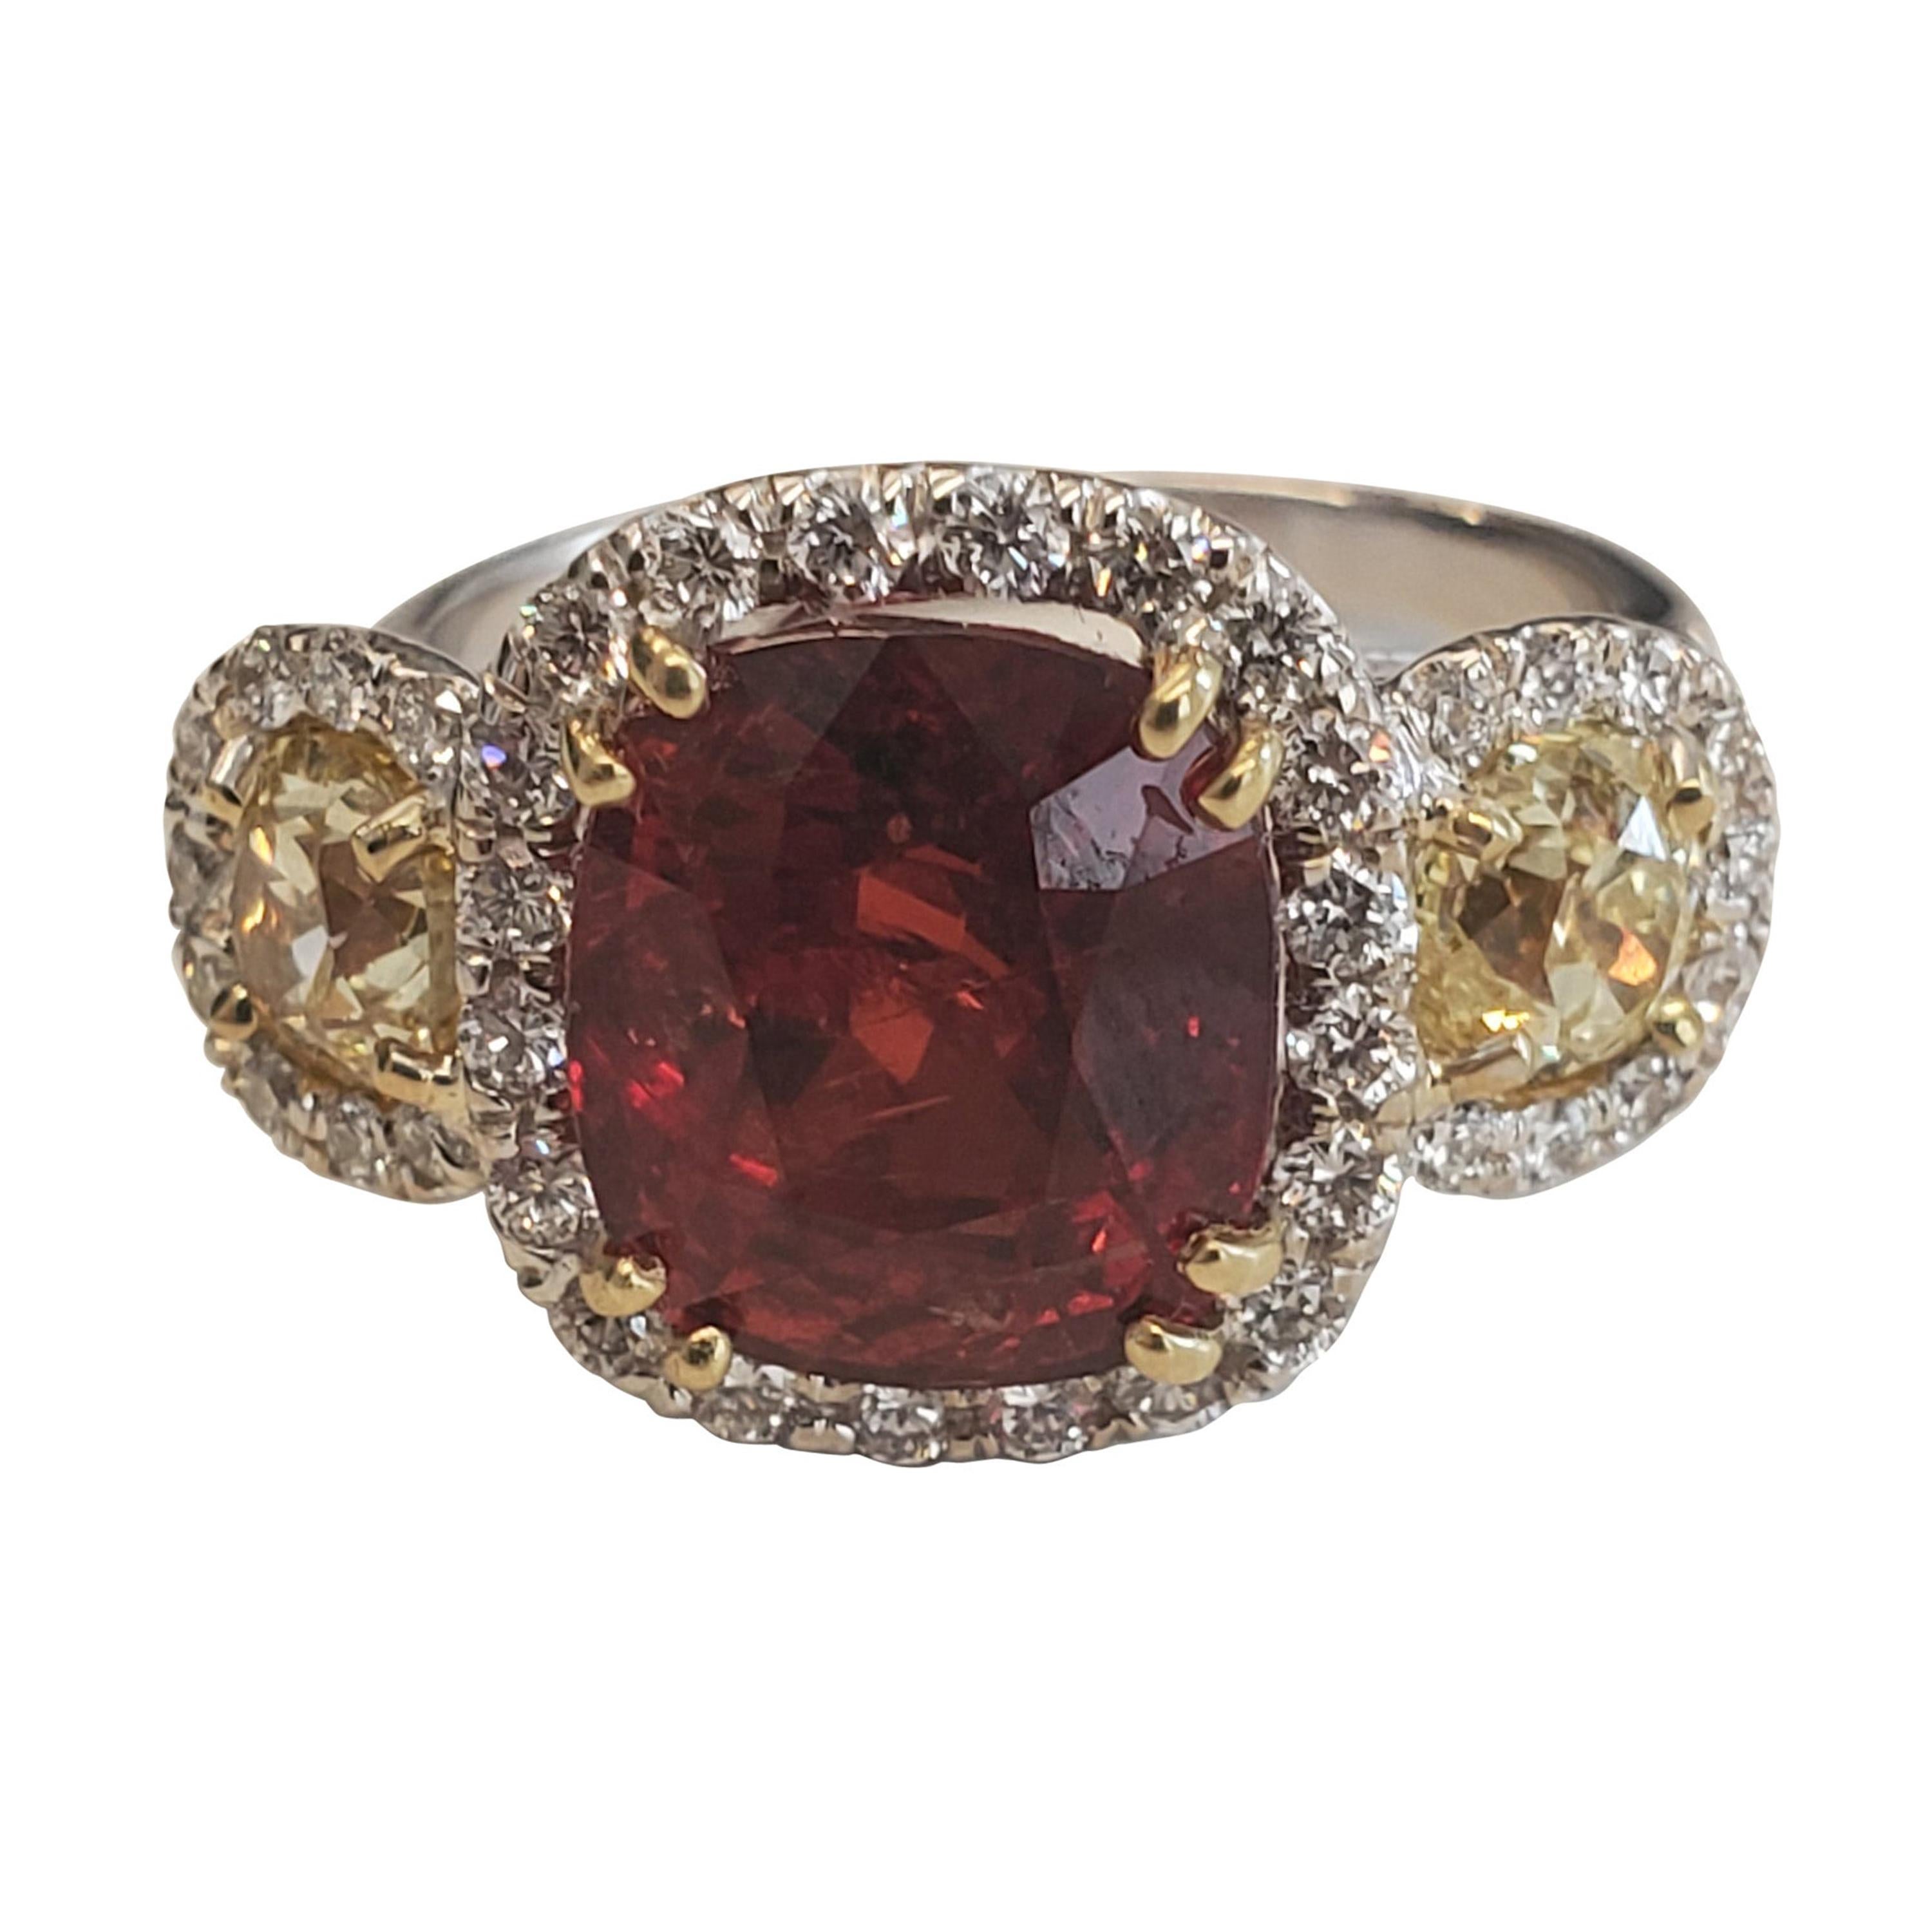 4.91 Carat Cushion Cut Red Spinel & Diamond Ring in 18k White Gold